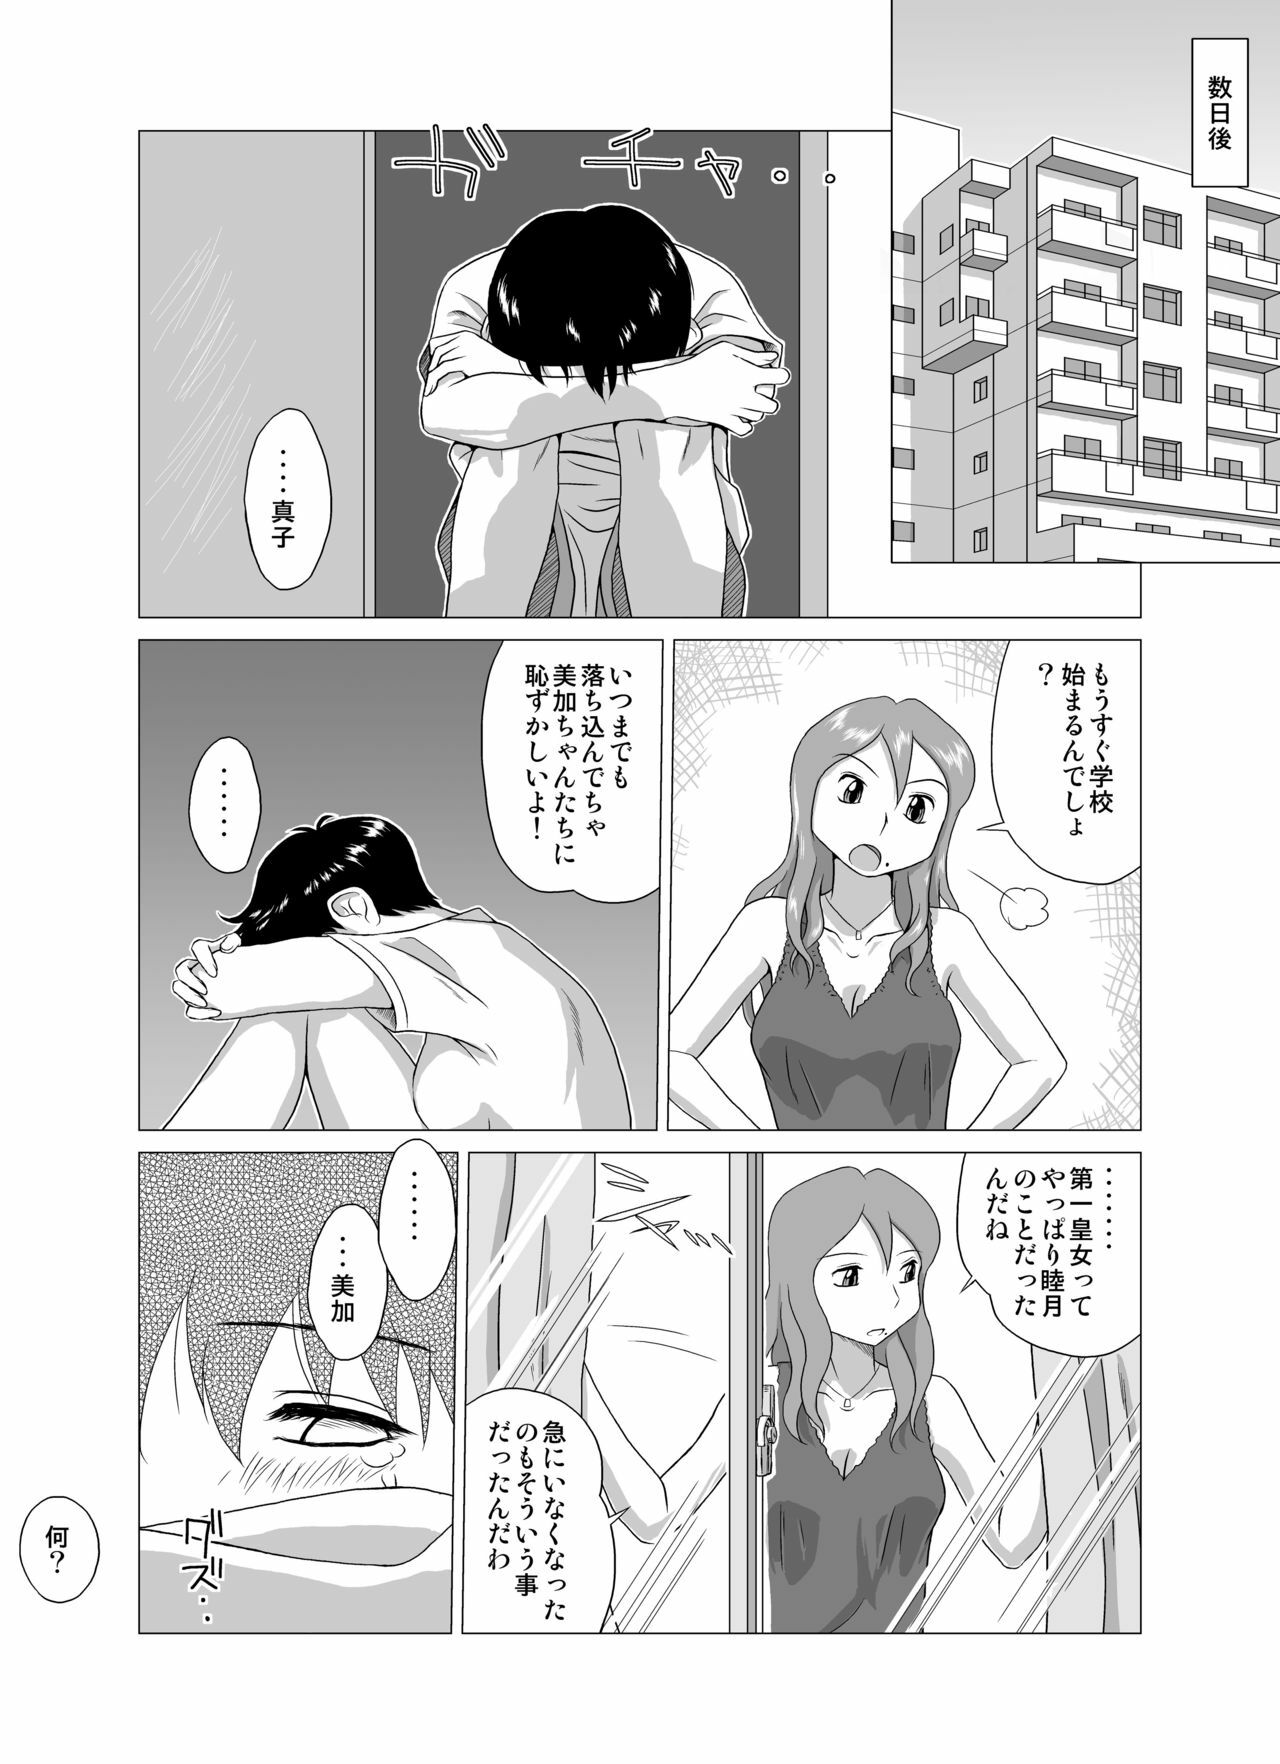 [GT-Wanko] The Days of F Vol. 4 page 38 full